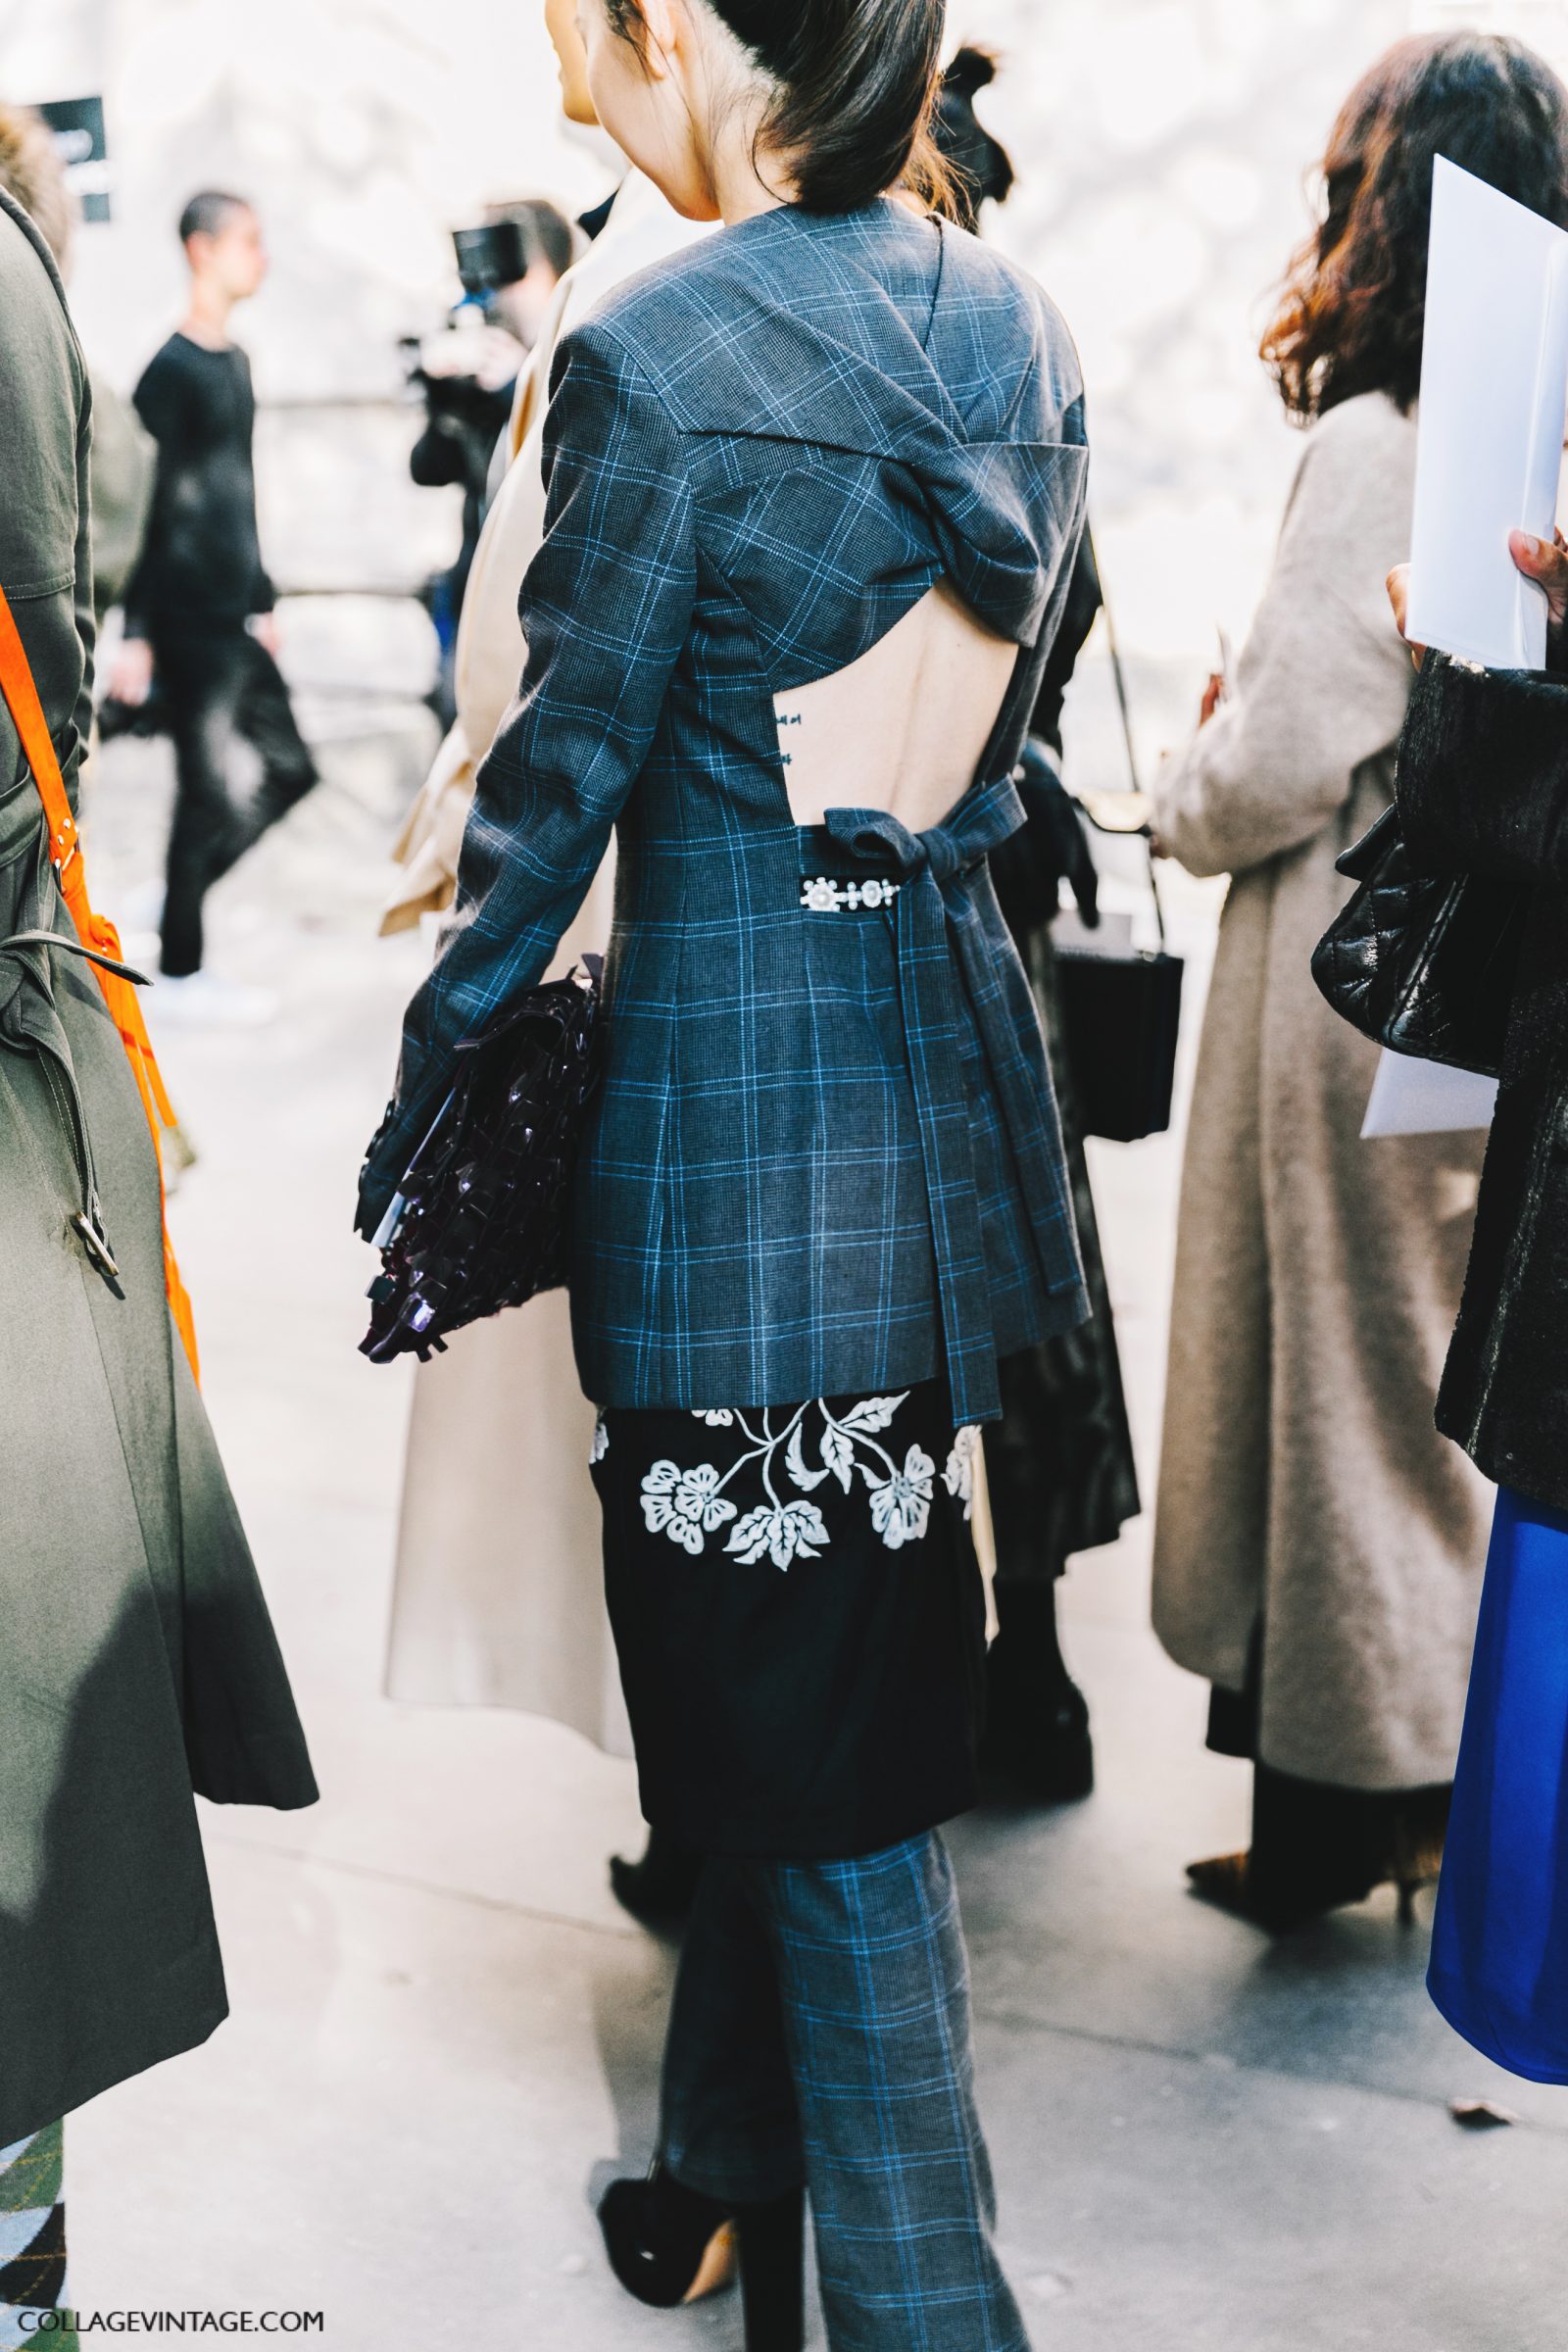 pfw-paris_fashion_week_ss17-street_style-outfits-collage_vintage-chanel-ellery-28